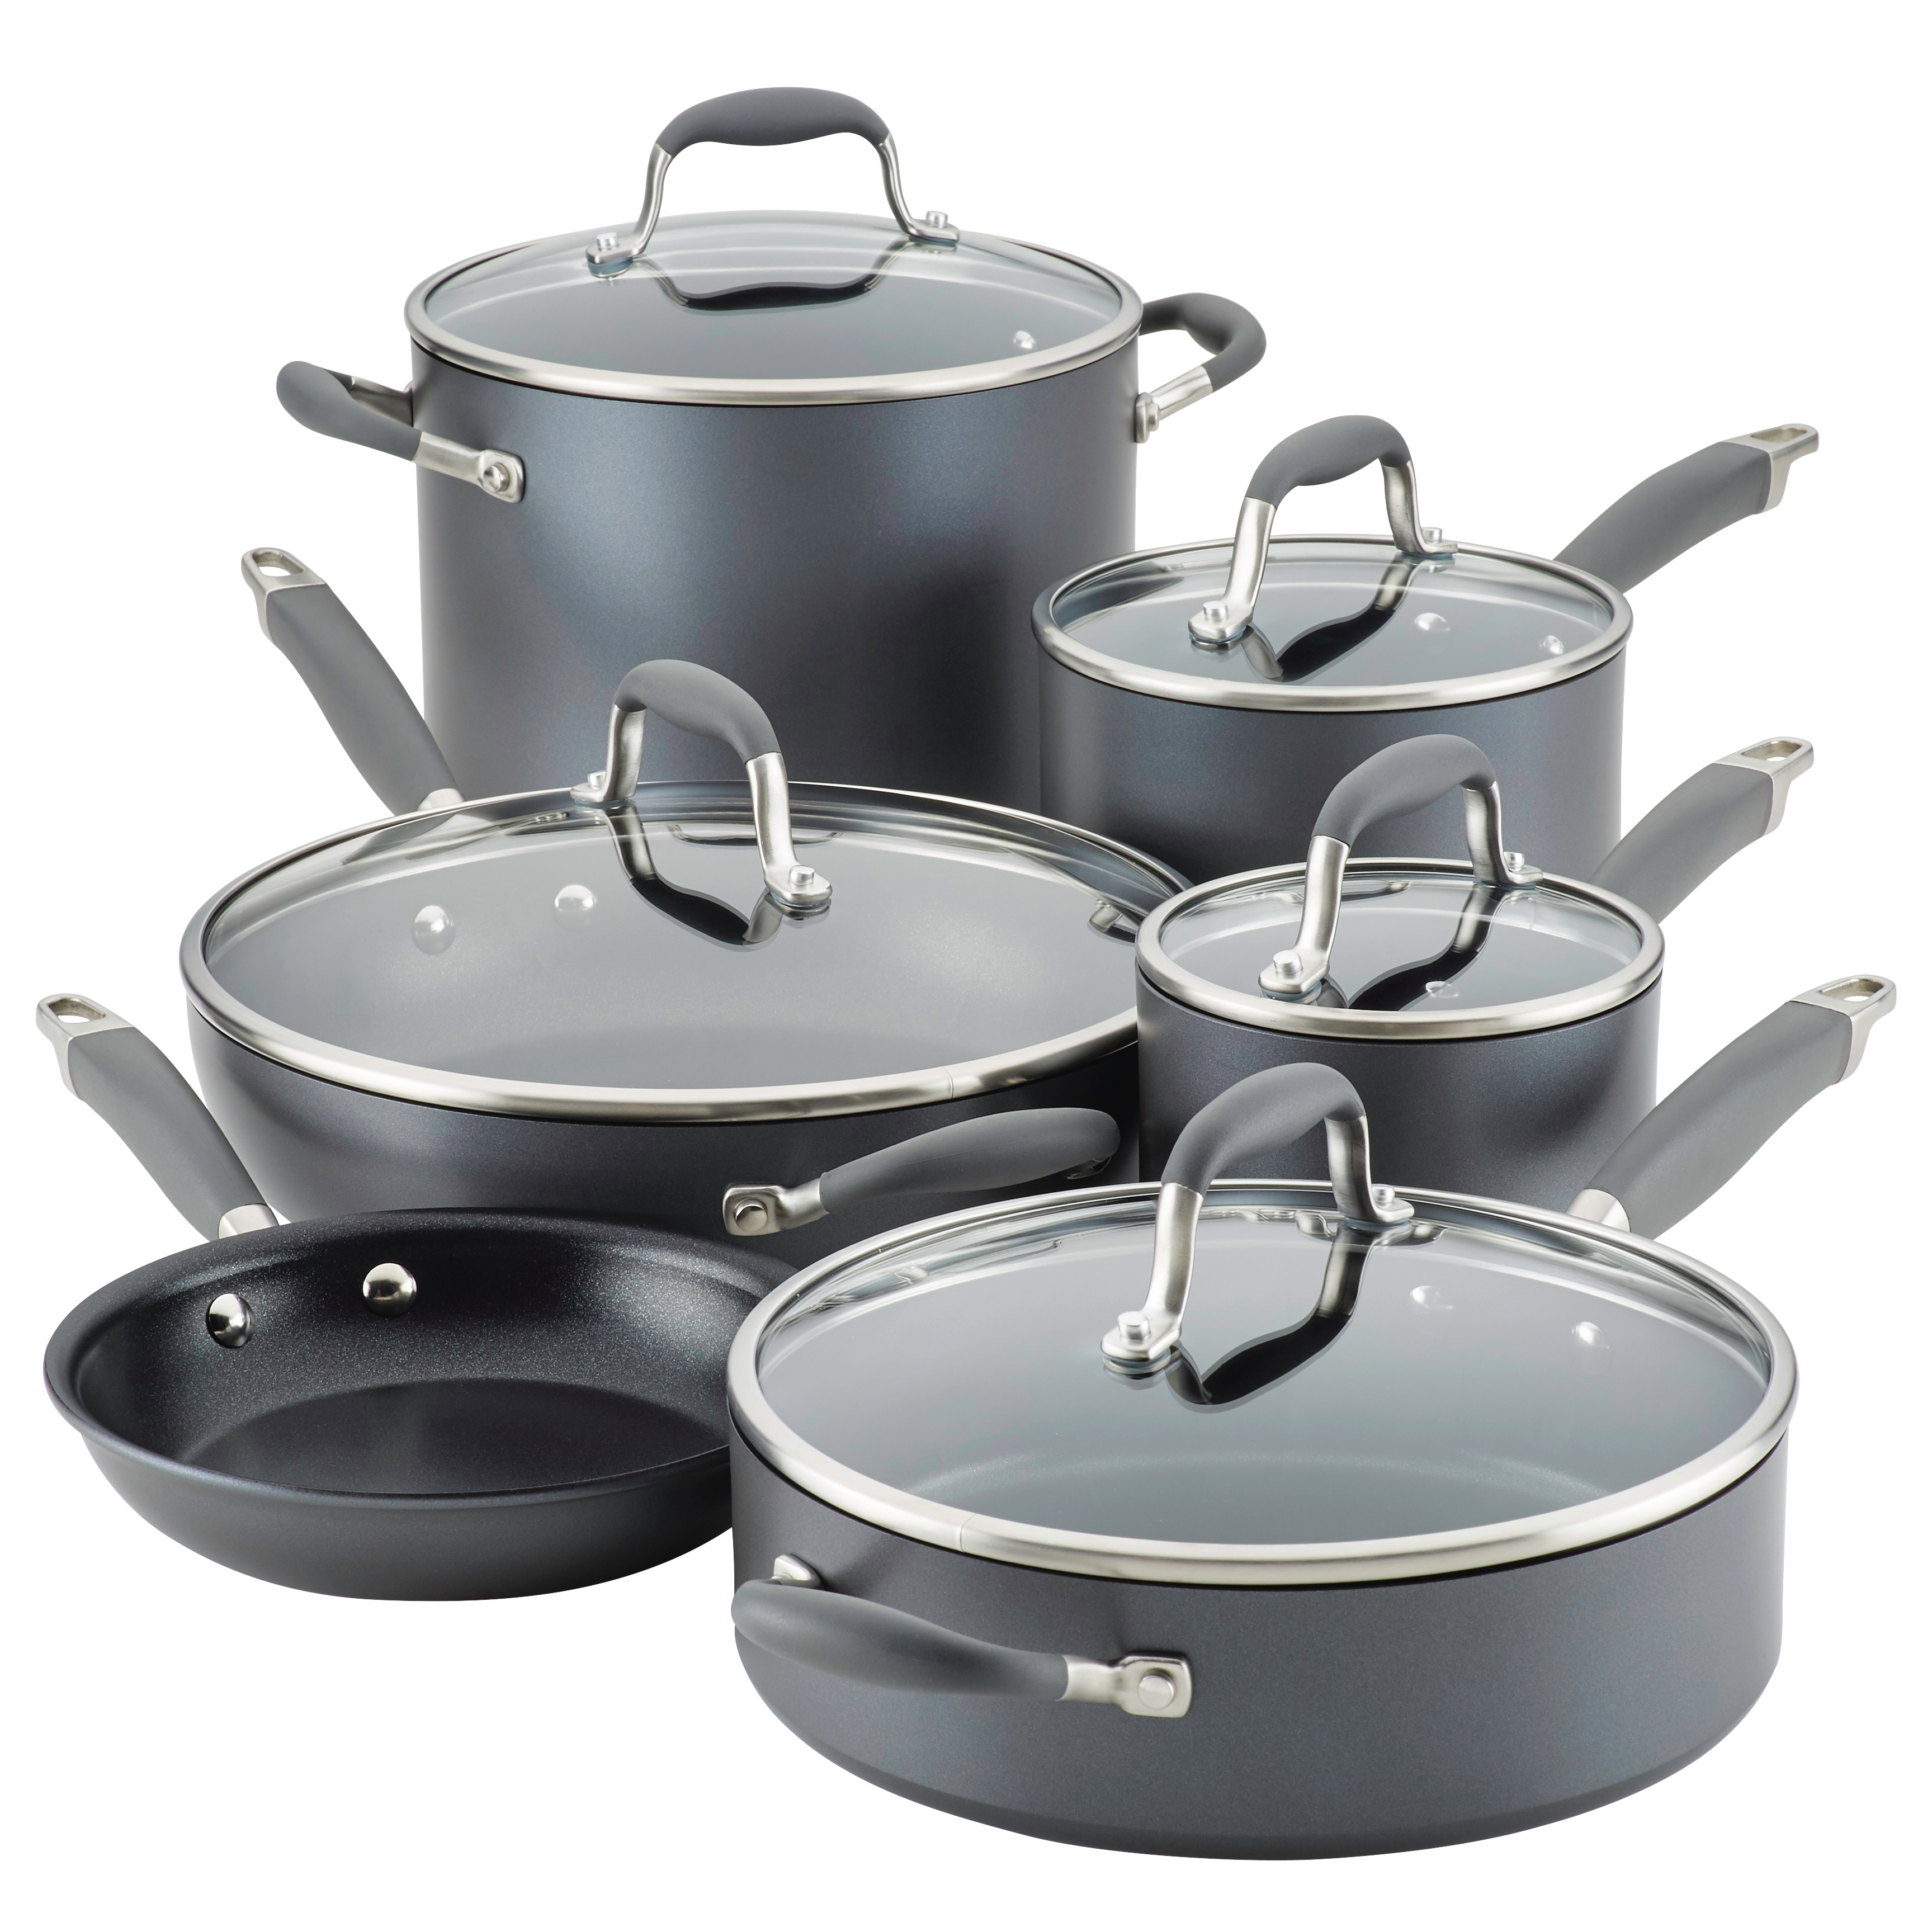 Anolon Advanced Home 11 Piece Hard-Anodized Nonstick Cookware Set, Moonstone - image 1 of 7